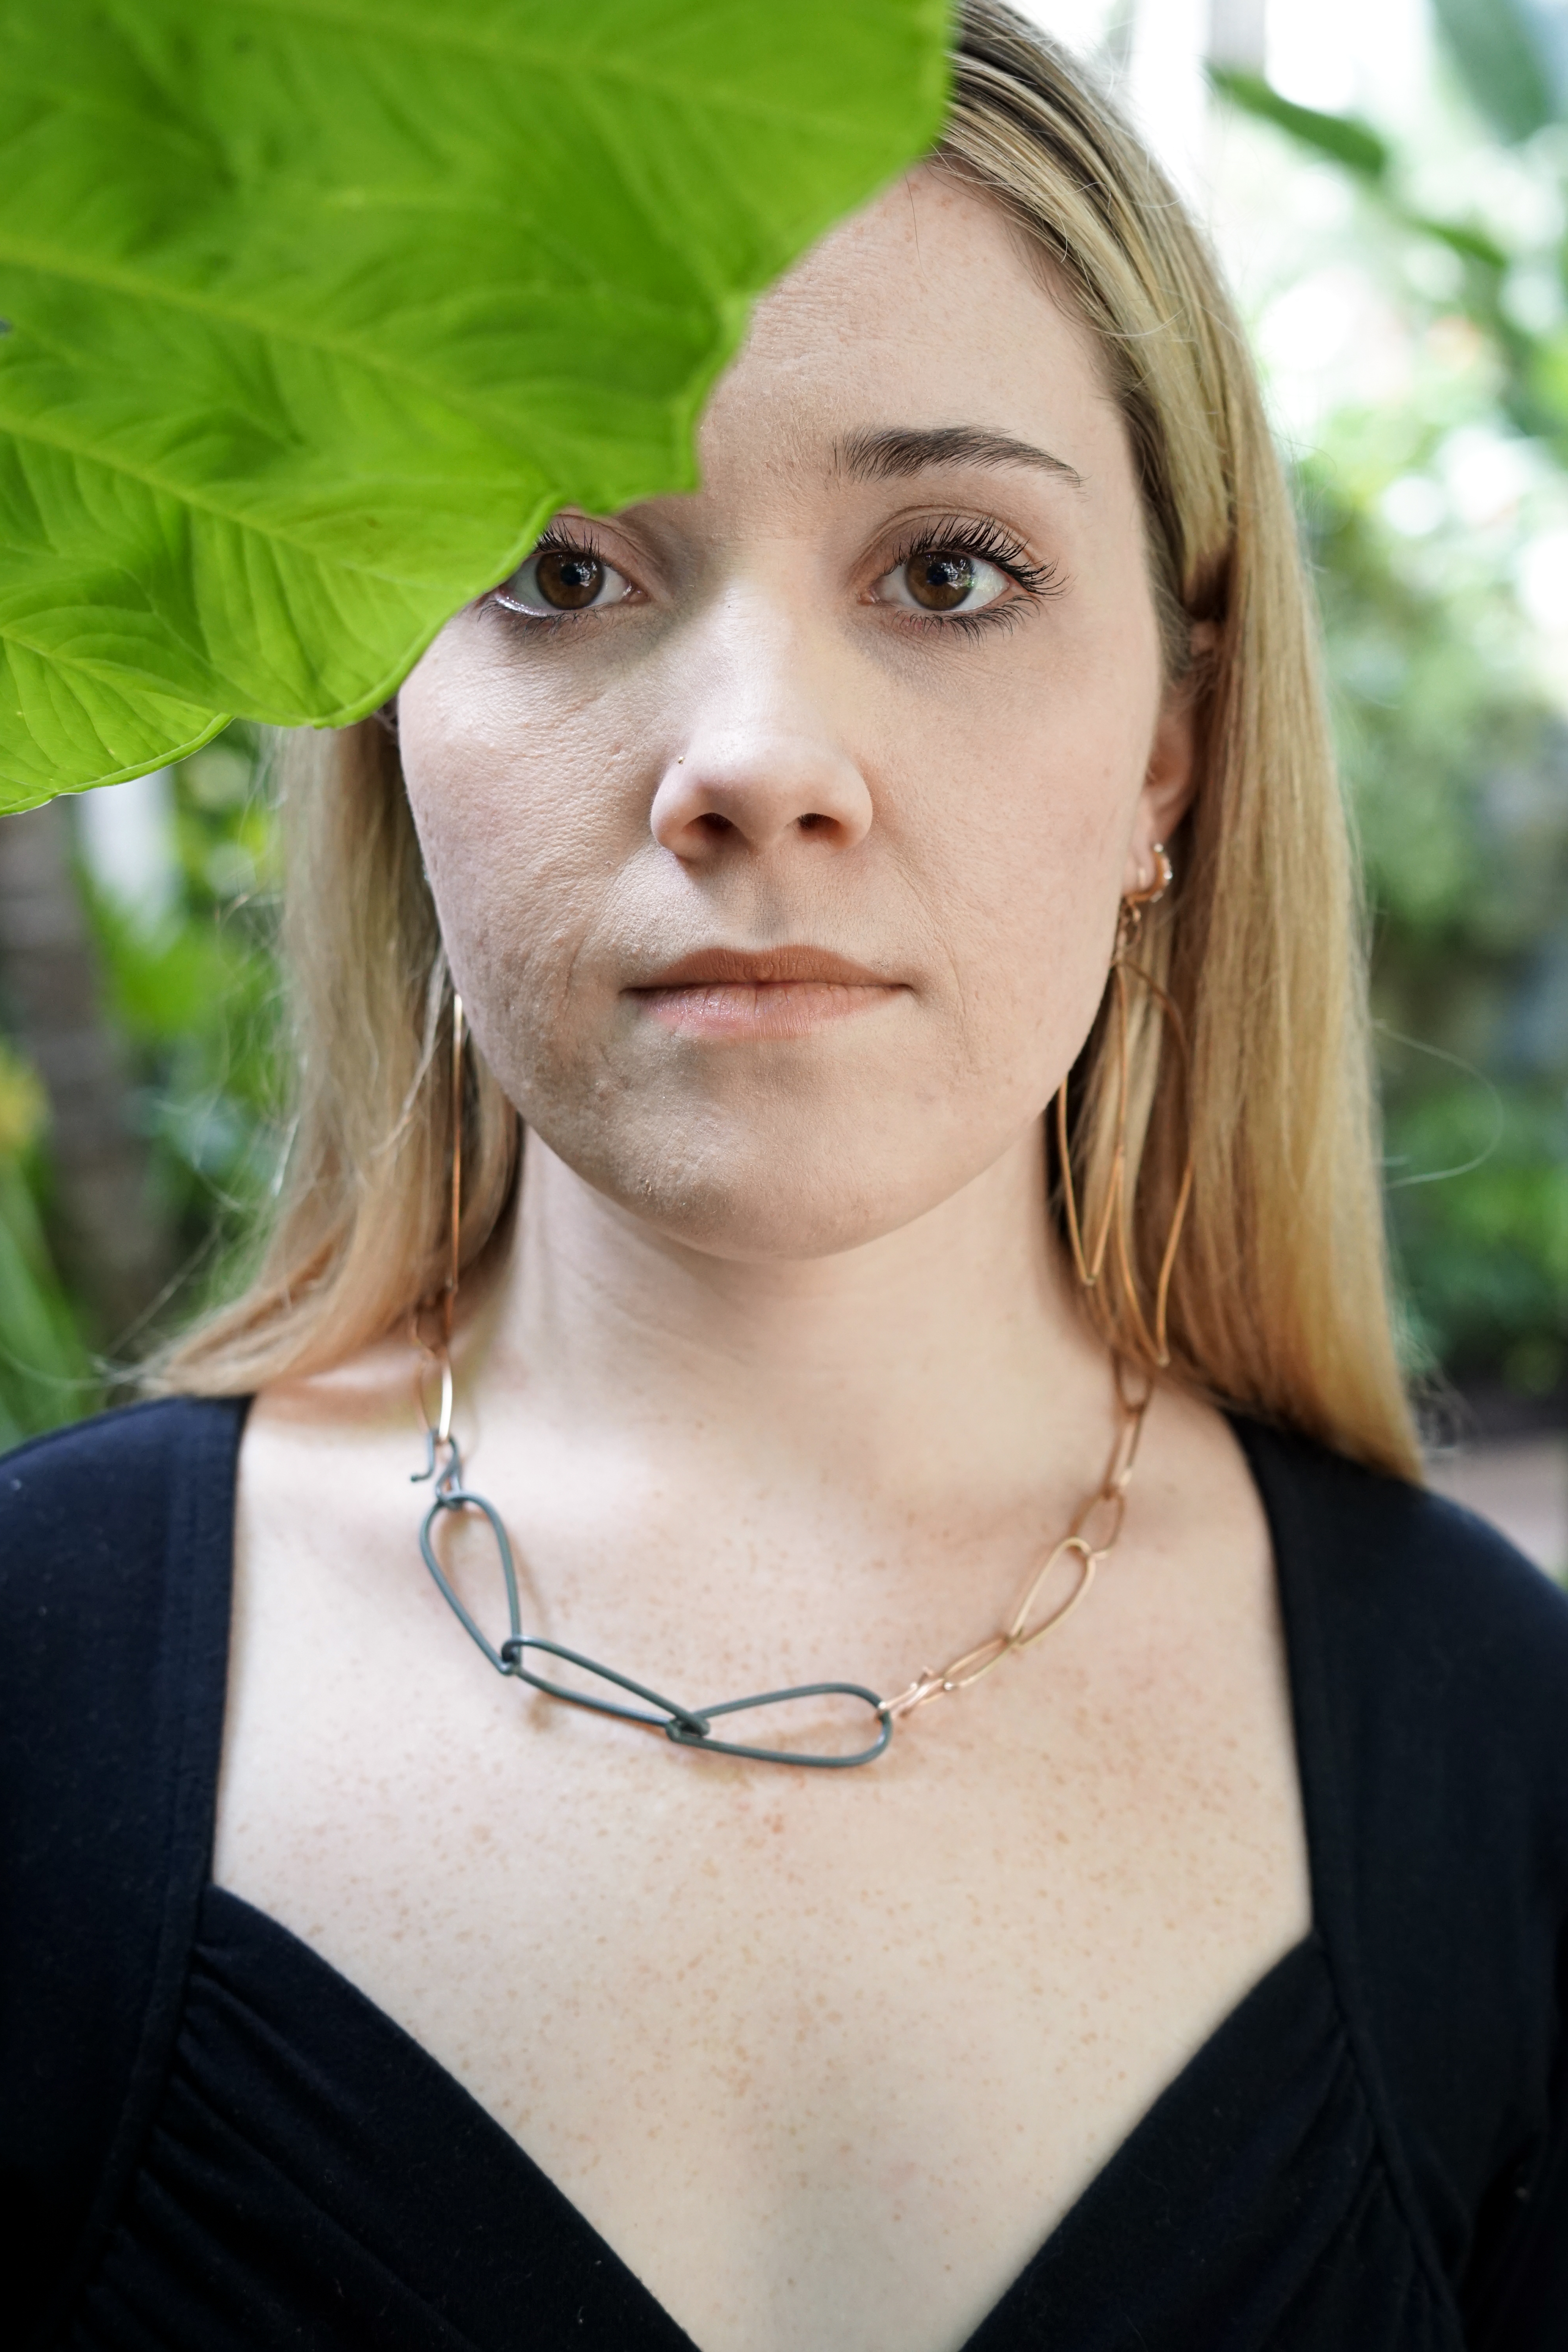 Trista wearing bronze and grey necklace and bronze statement earrings with large green leaf